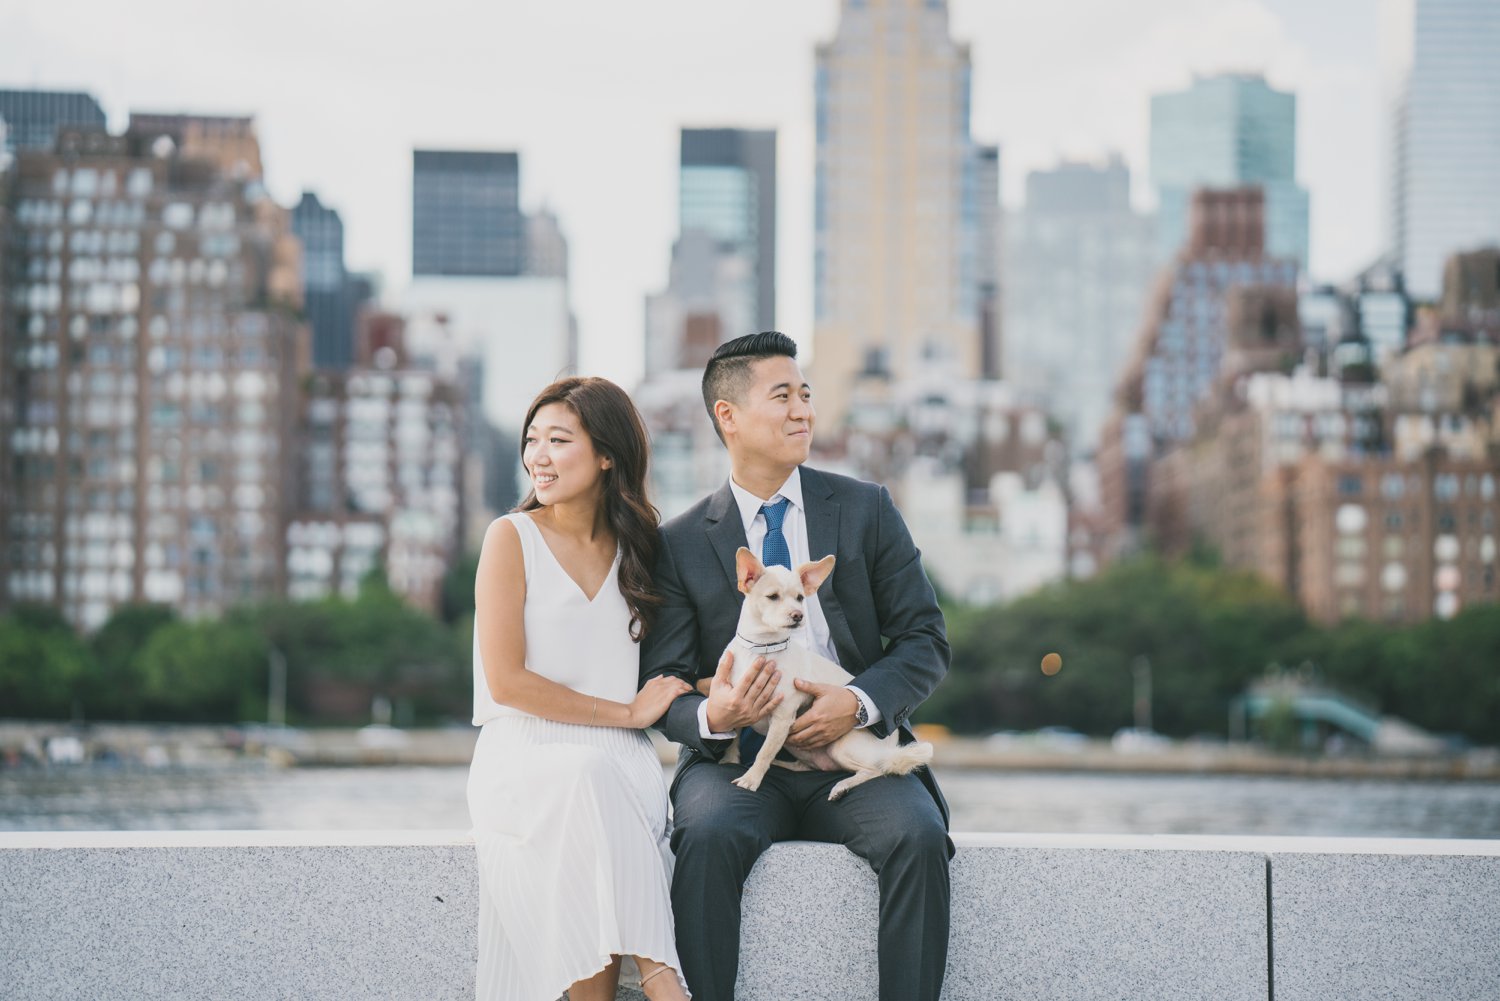 64NYC-NJ-ENGAGEMENT-PHOTOGRAPHY-BY-INTOTHESTORY-MOO-JAE.JPG